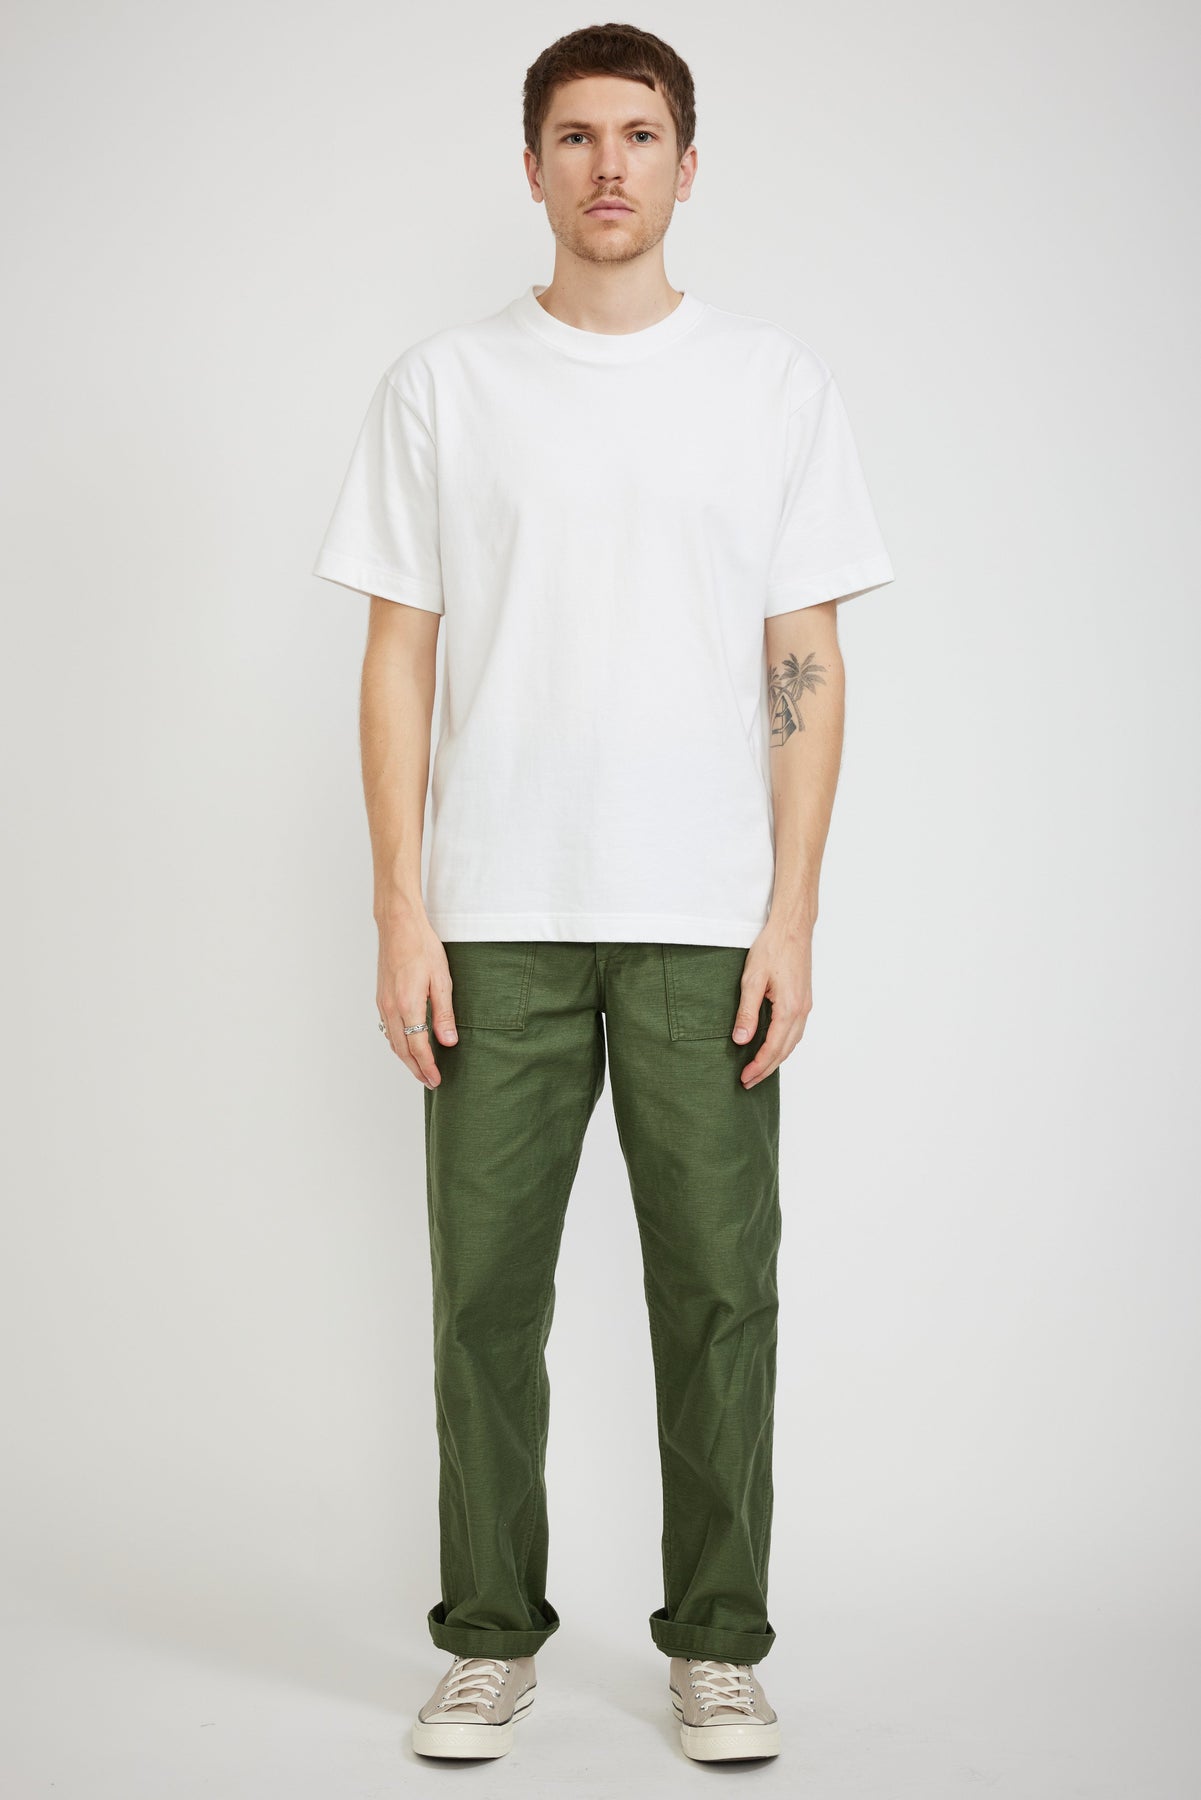 Orslow US Army Fatigue Pants Green | Maplestore